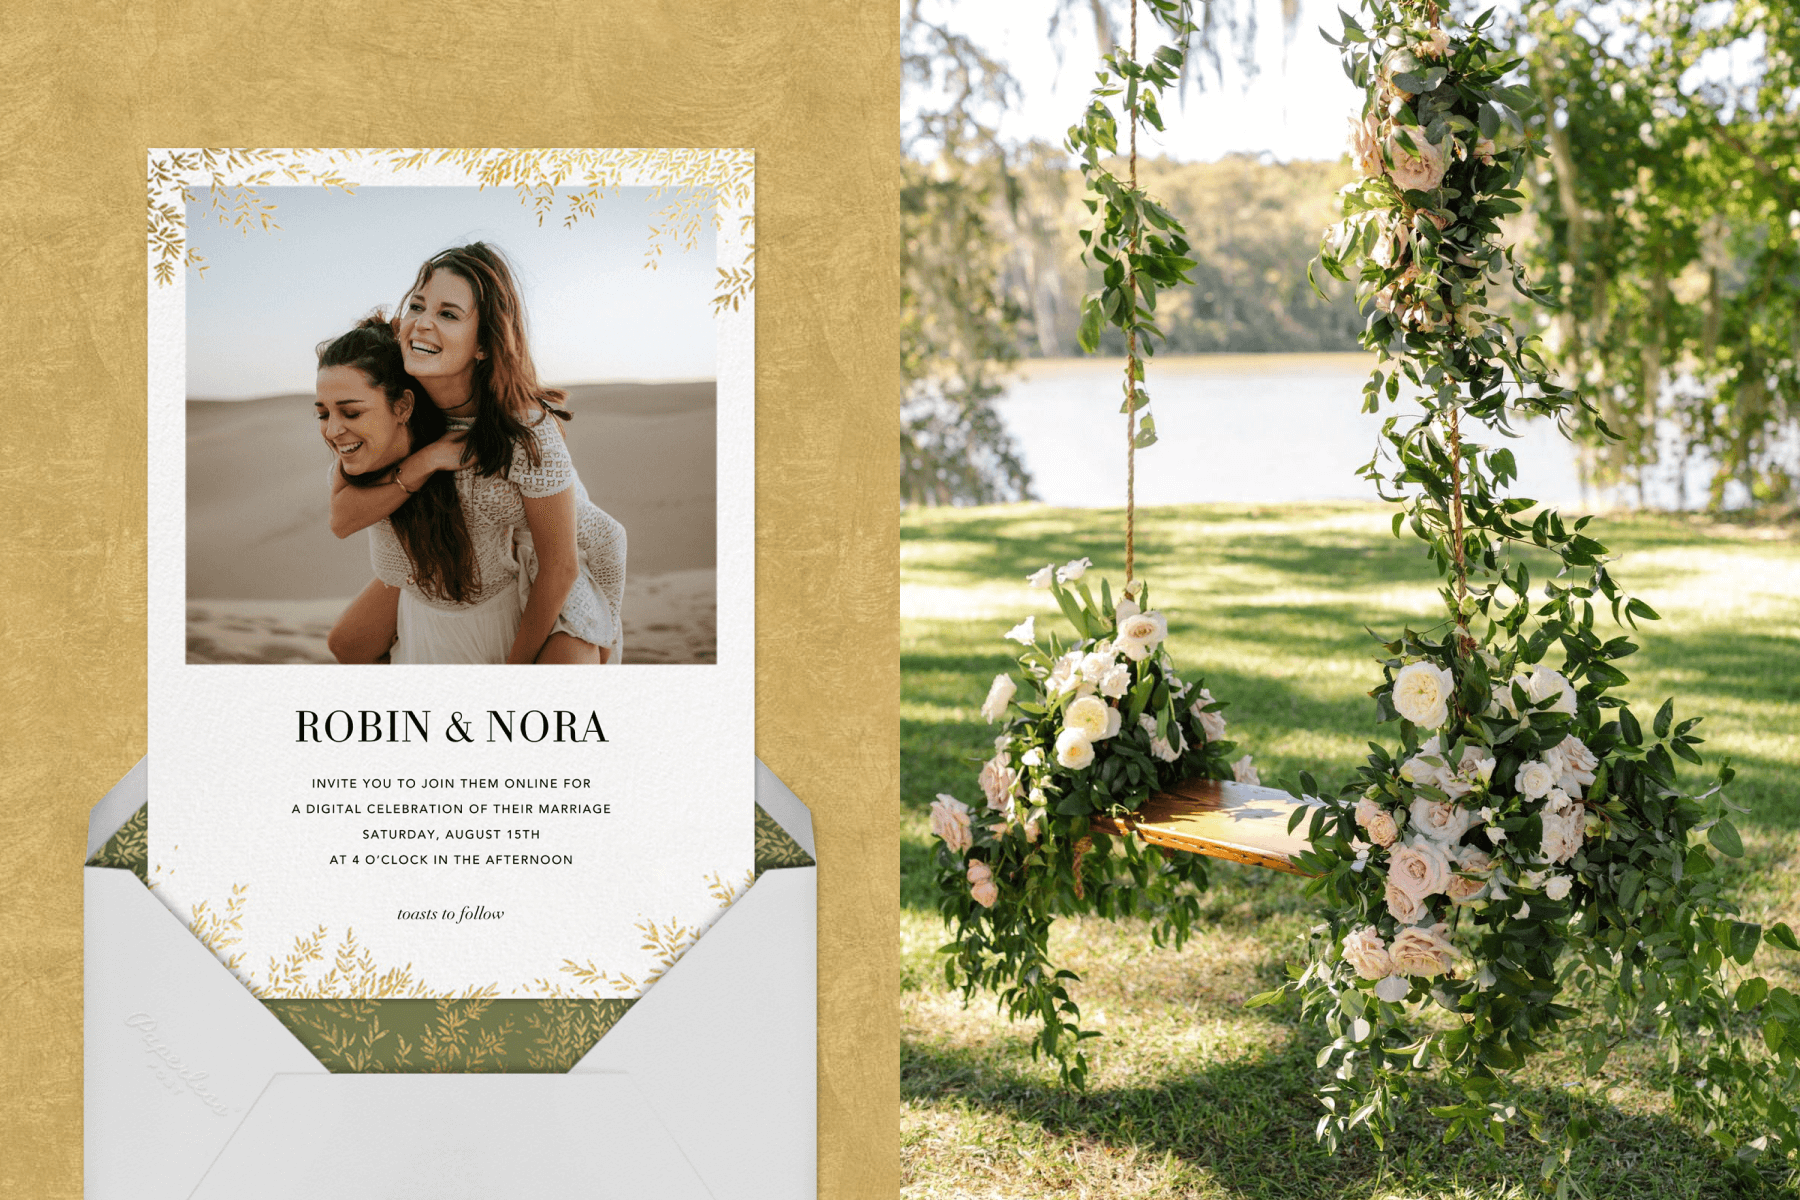 Left: wedding invitation with a couple of women giving each other a piggy back ride. Right: outdoor wooden swing with roses installed on the ropes